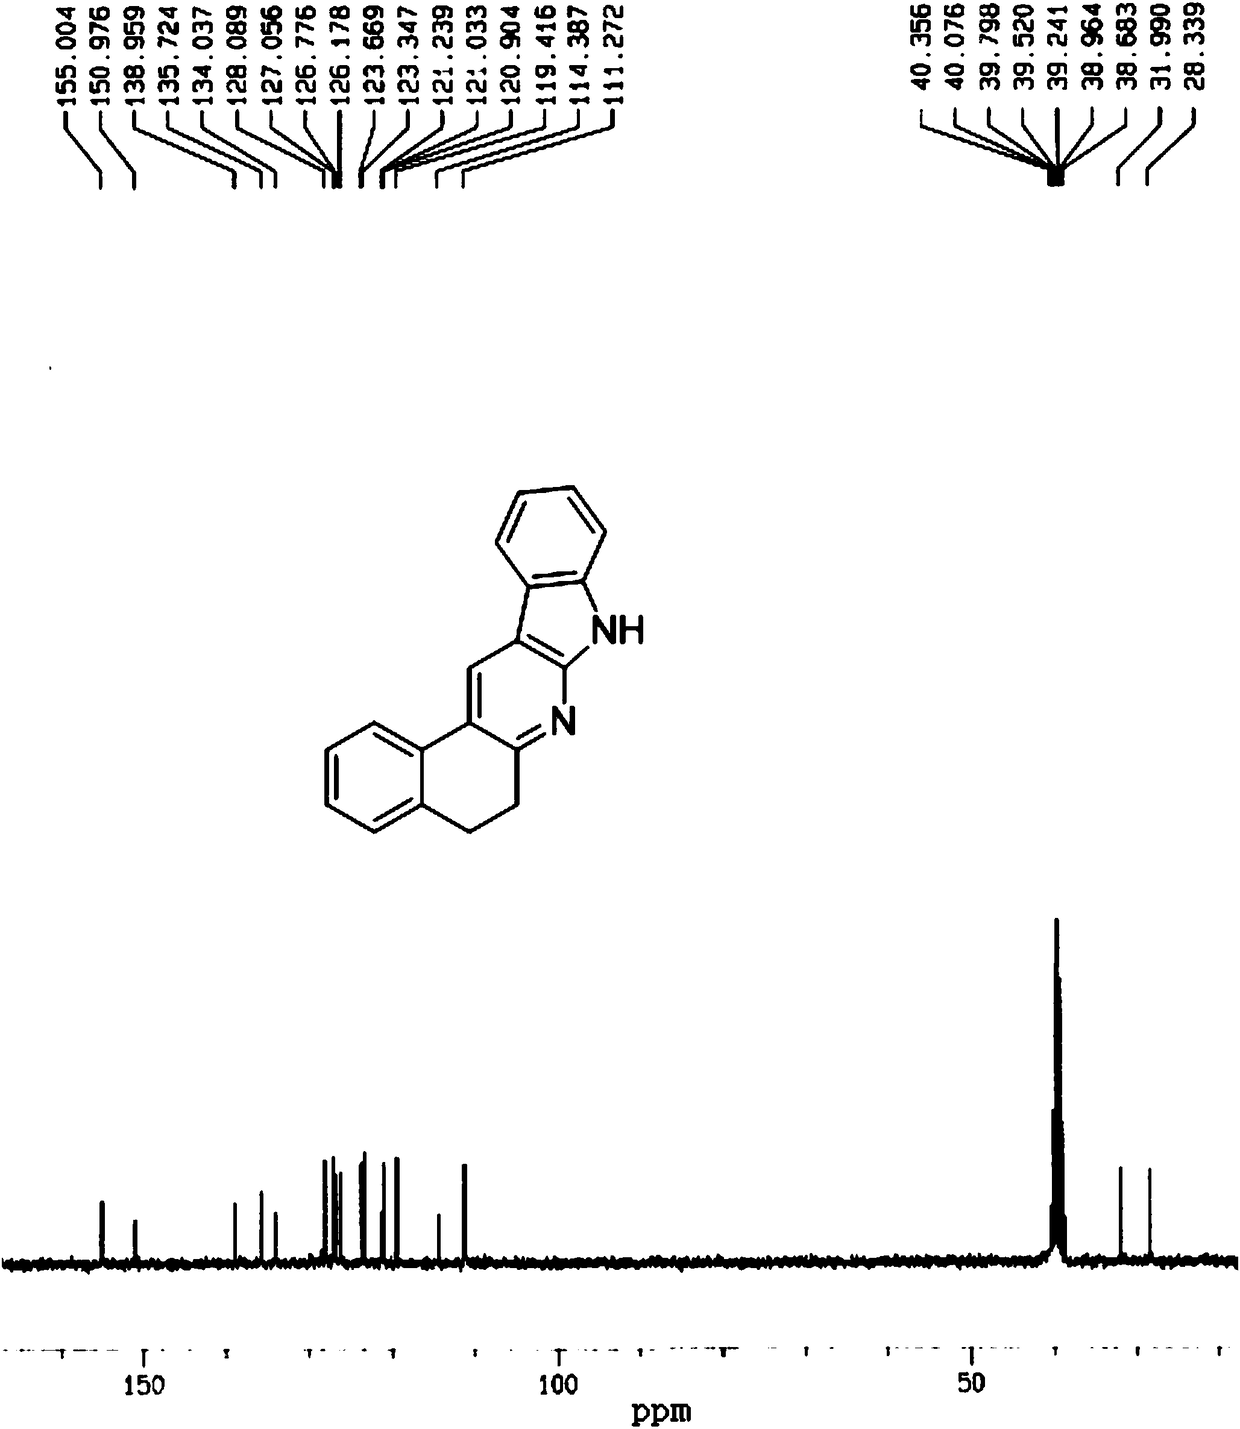 5,6-dihydrobenzo[f]indole[2,3-b]quinoline type compound and synthesis method thereof